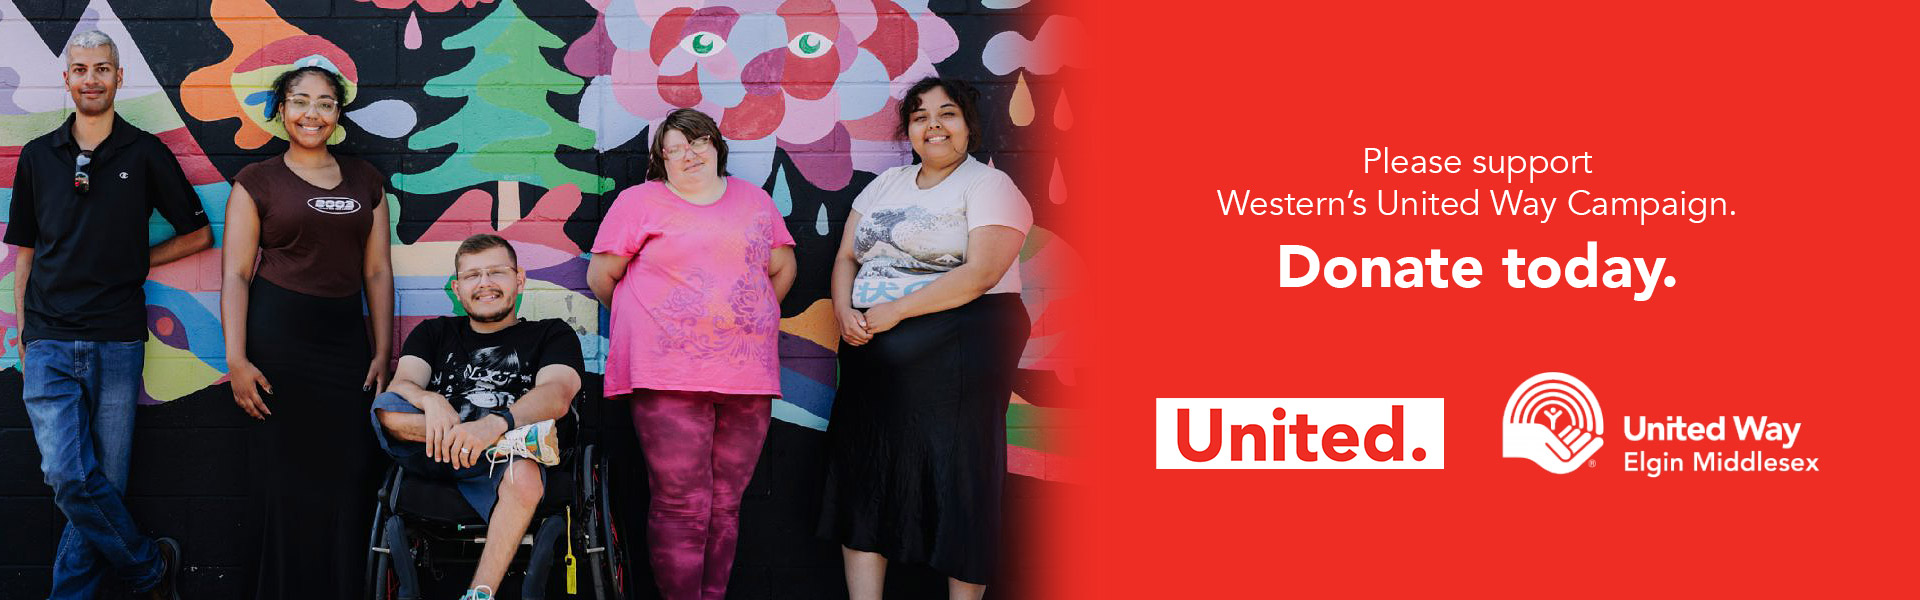 Please support Western's United Way Campaign. A group of 5 individuals smiling and looking at the camera